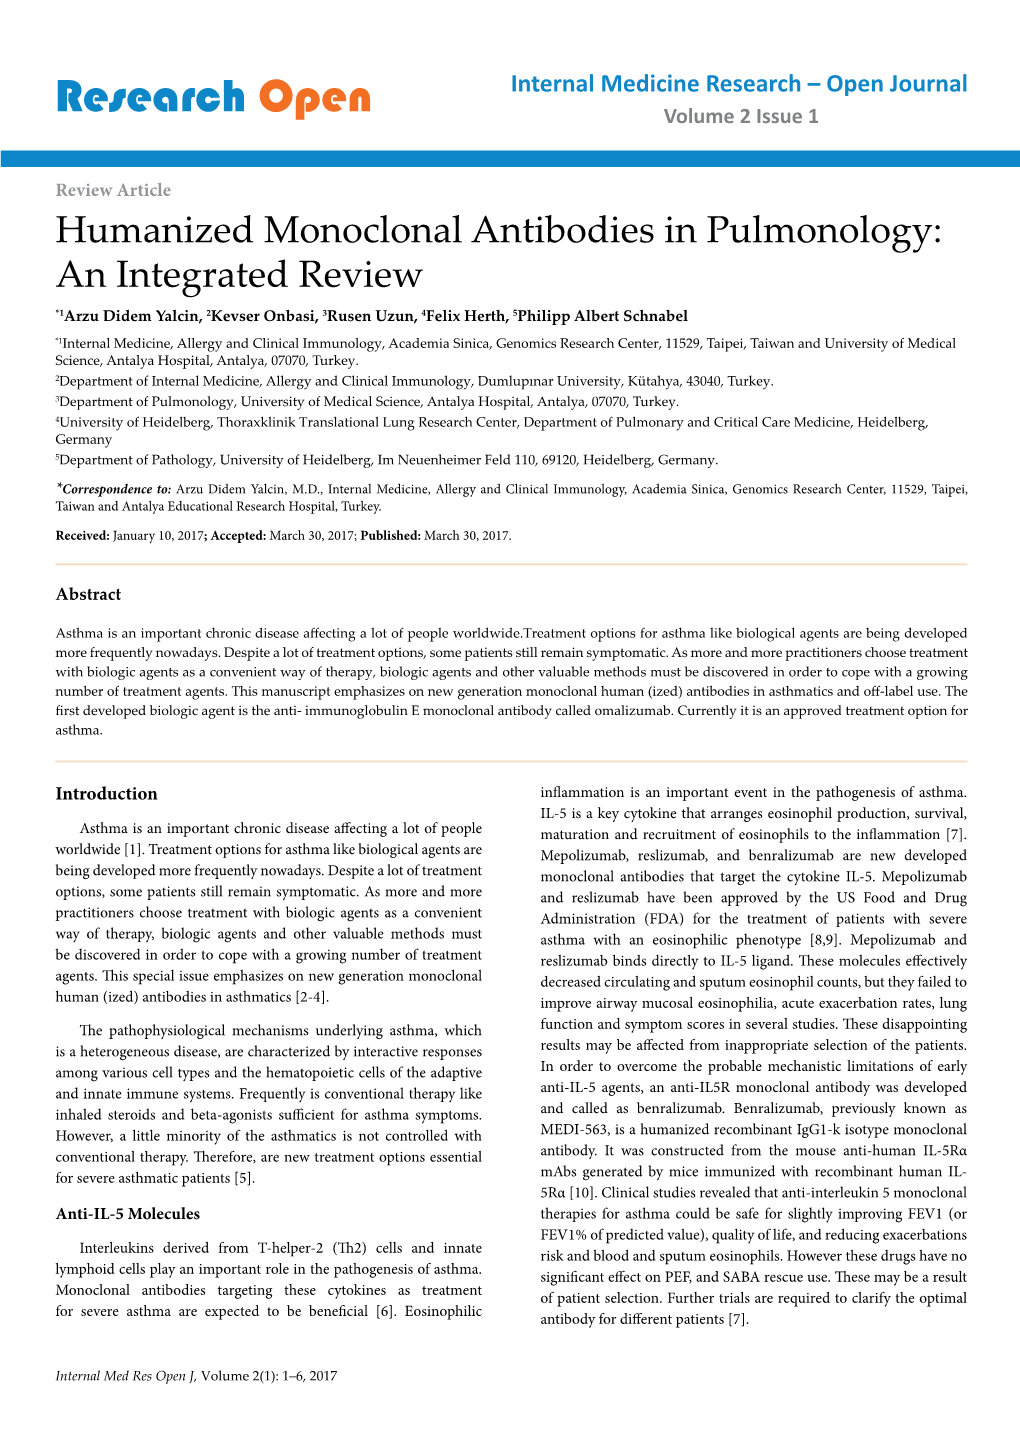 View Article Humanized Monoclonal Antibodies in Pulmonology